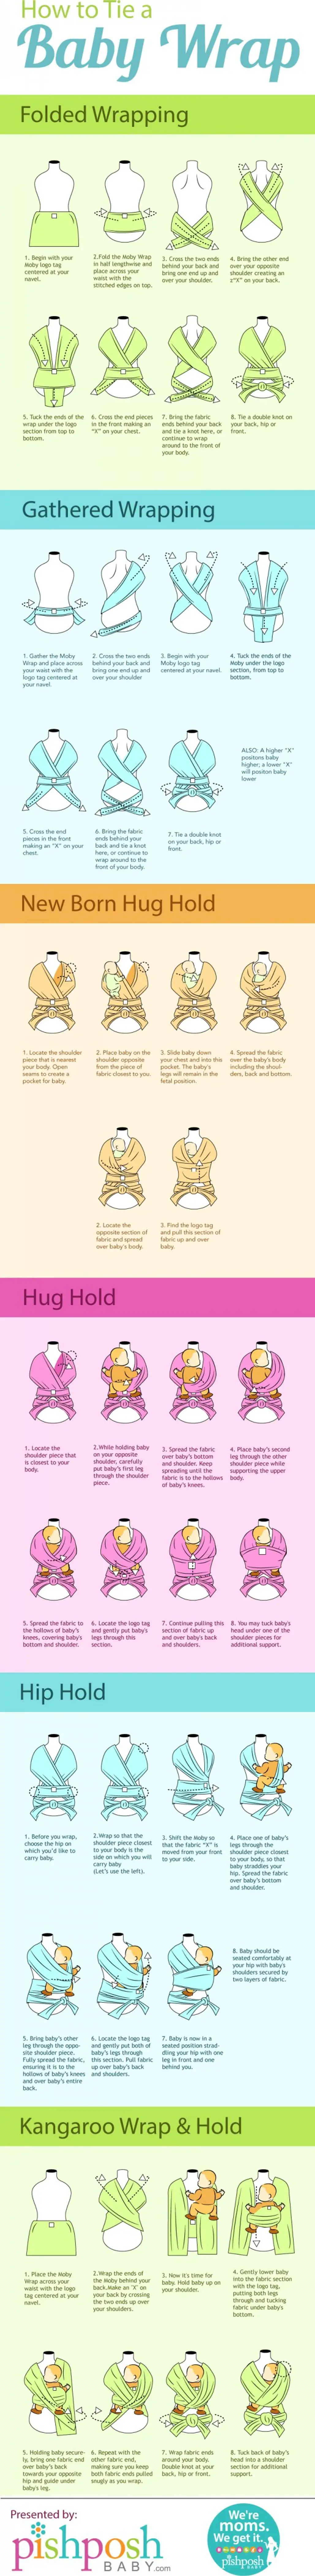 How to Tie a Baby Wrap